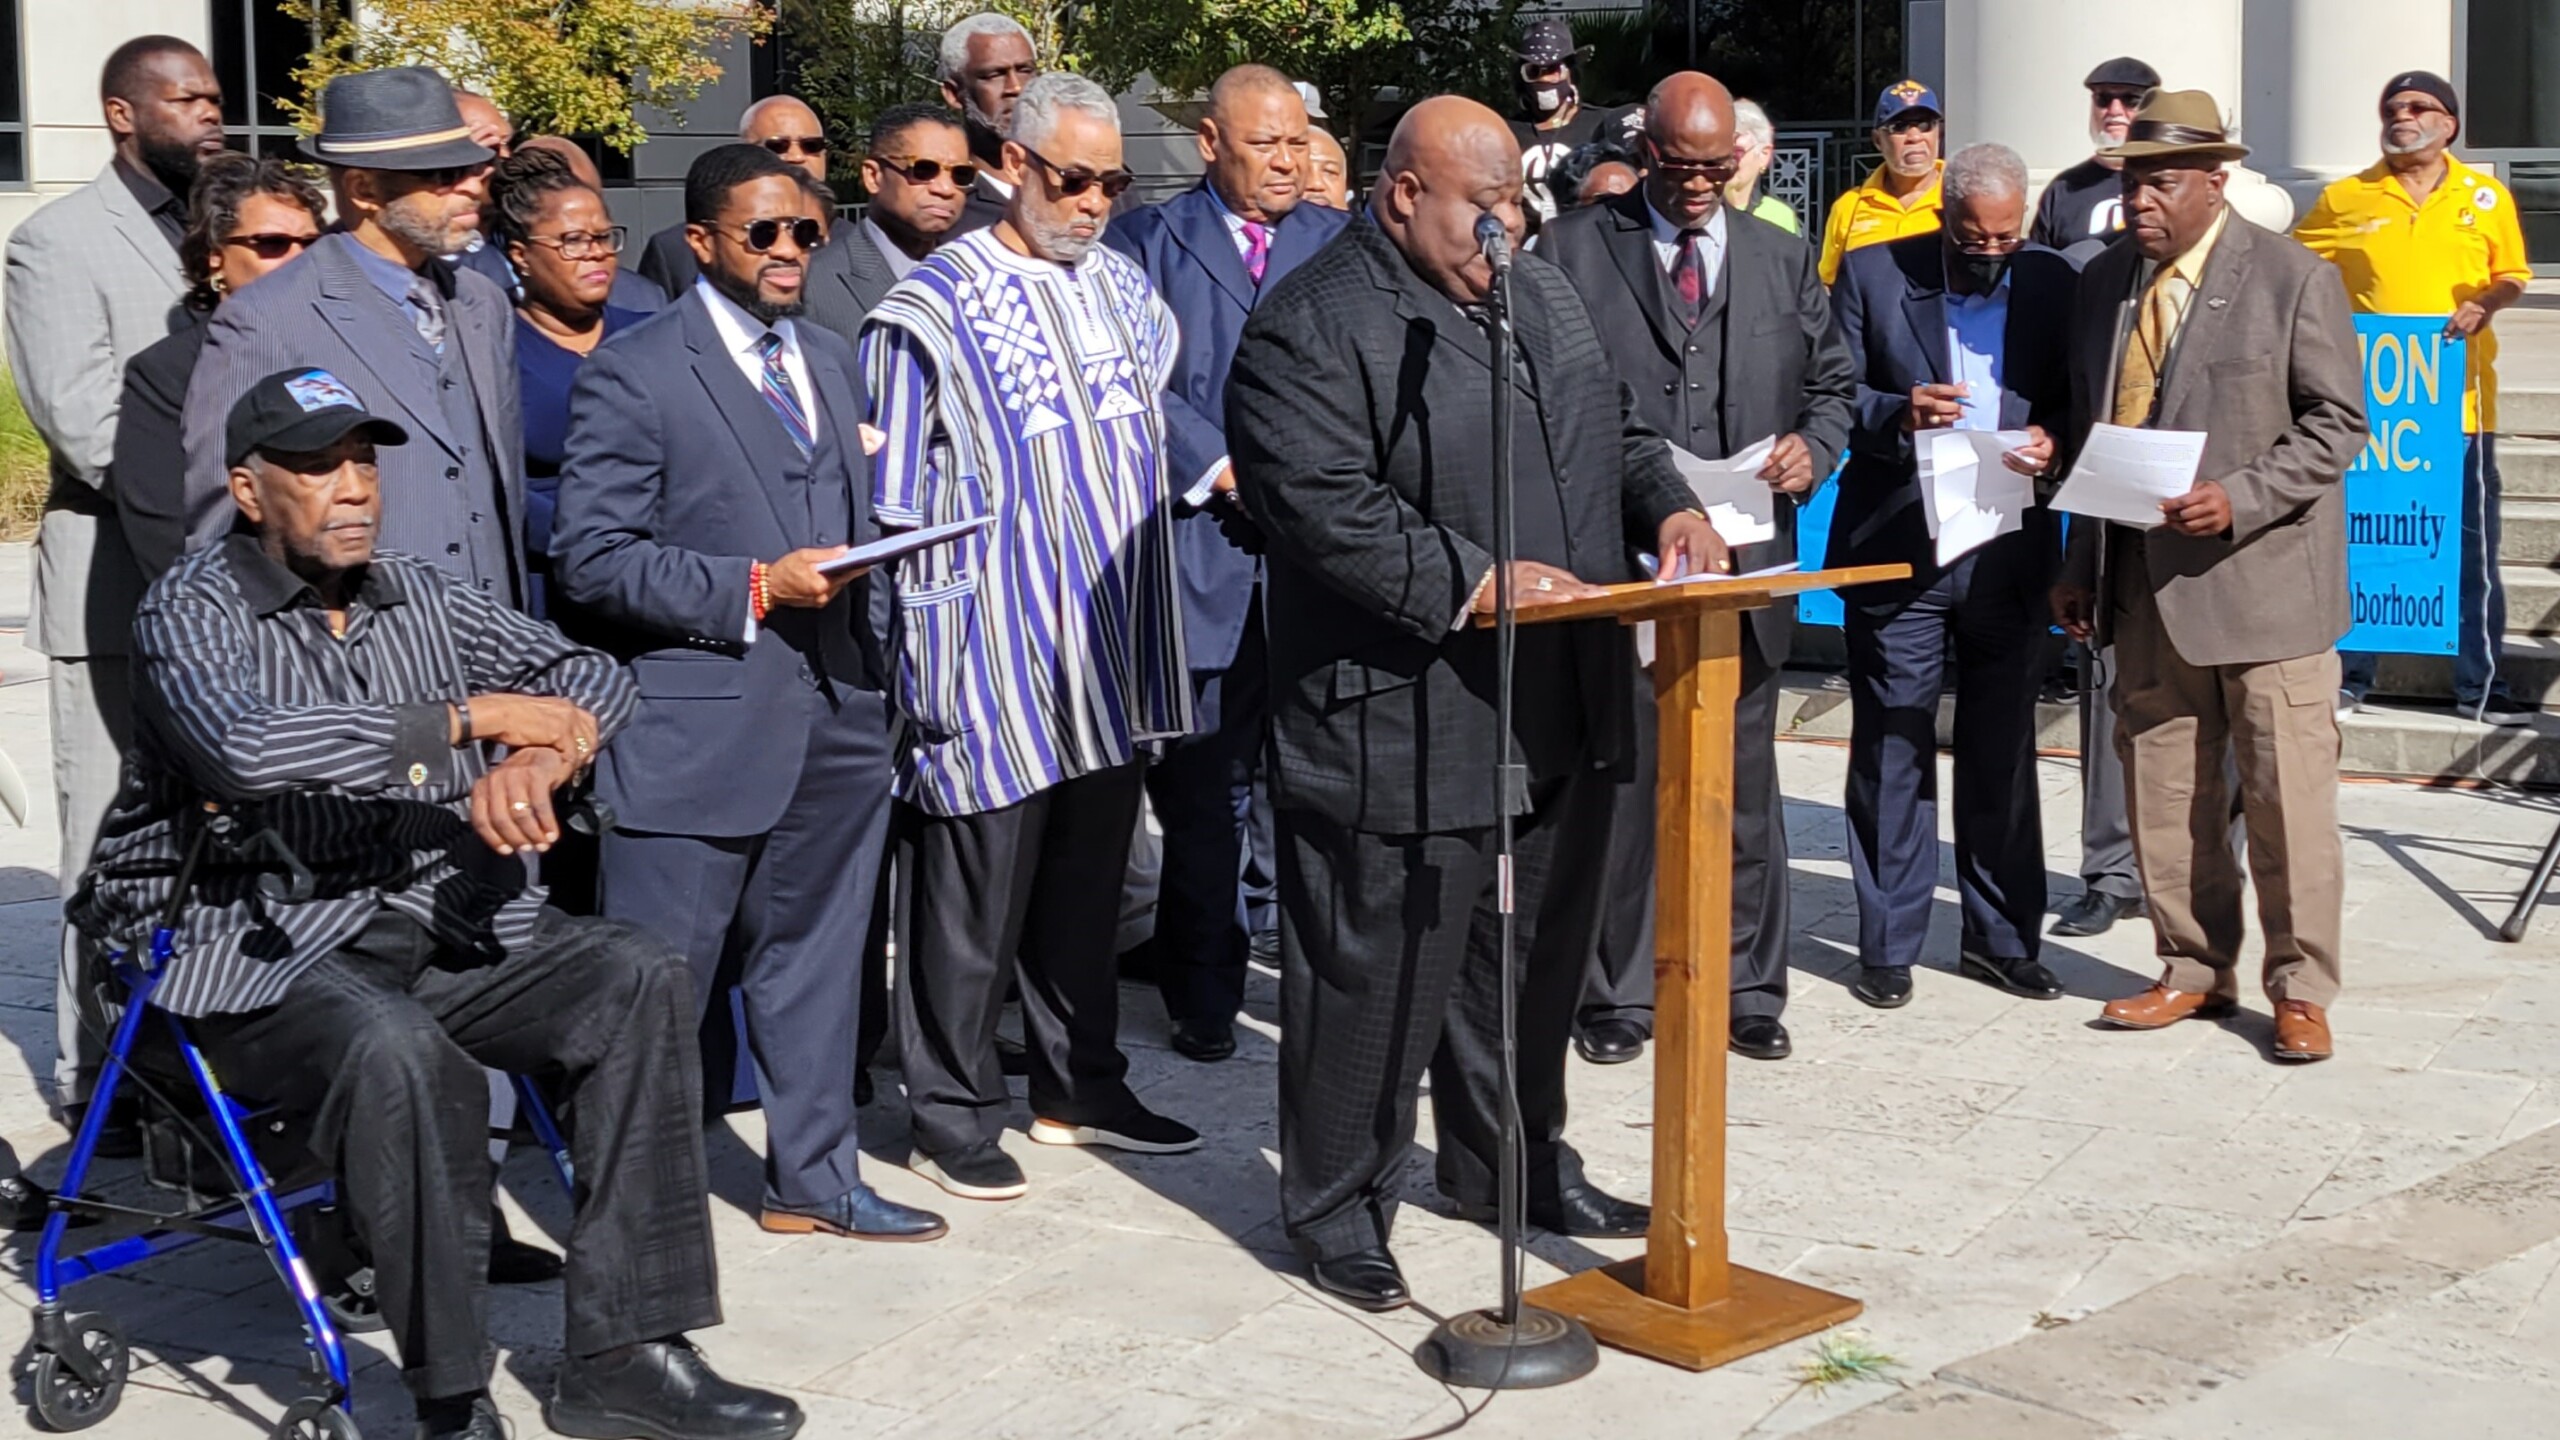 Featured image for “Black pastors demand meeting with sheriff over sergeant’s tweets”